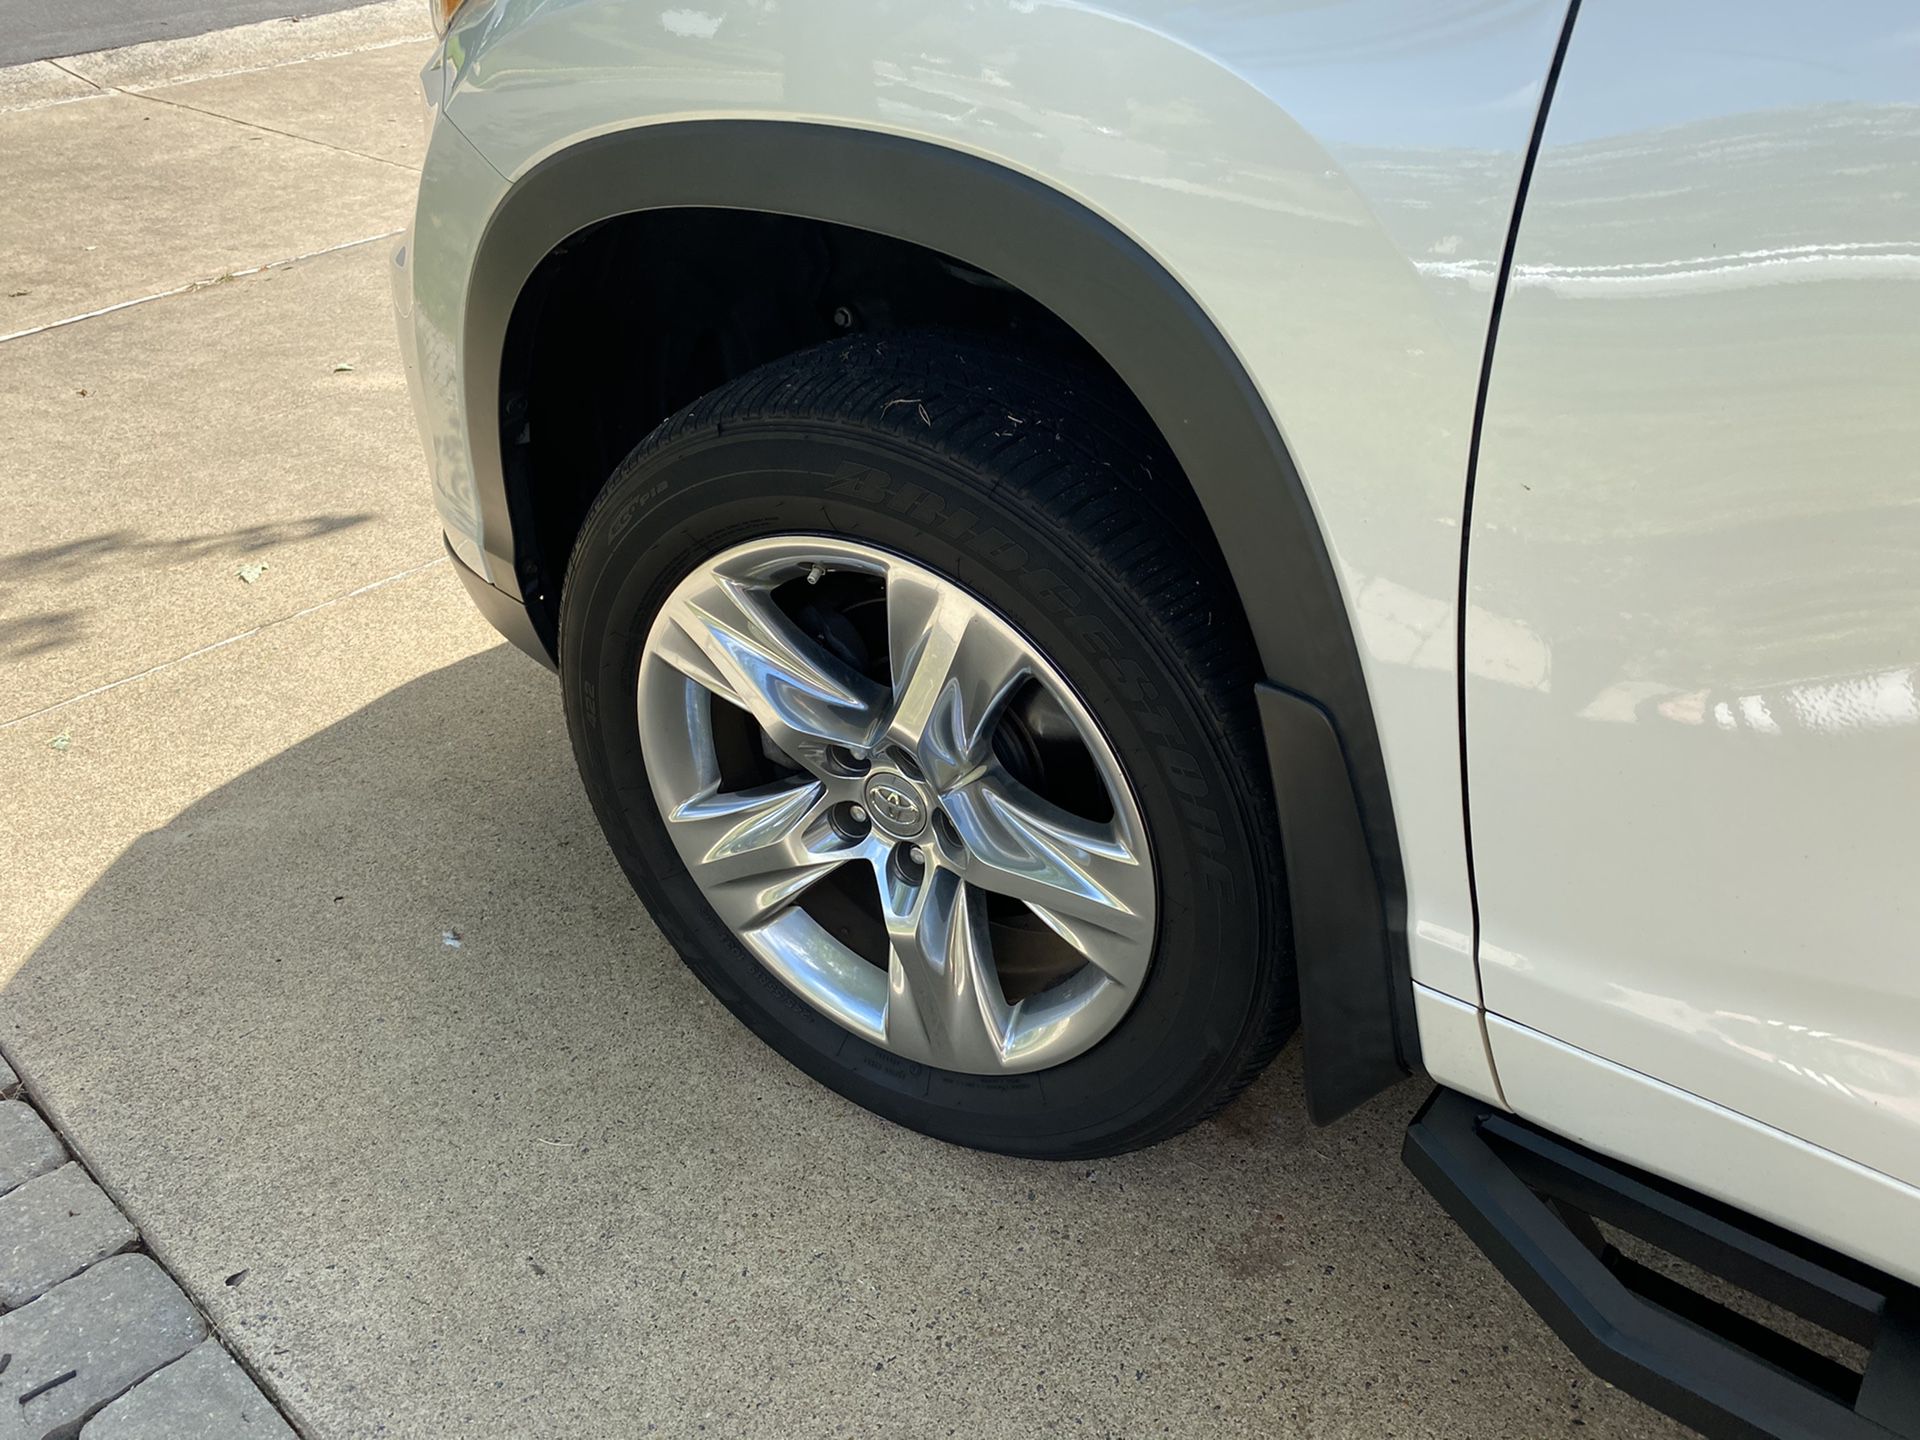 19” Rims with Tires. Stock wheels off my 2015 Toyota Highlander